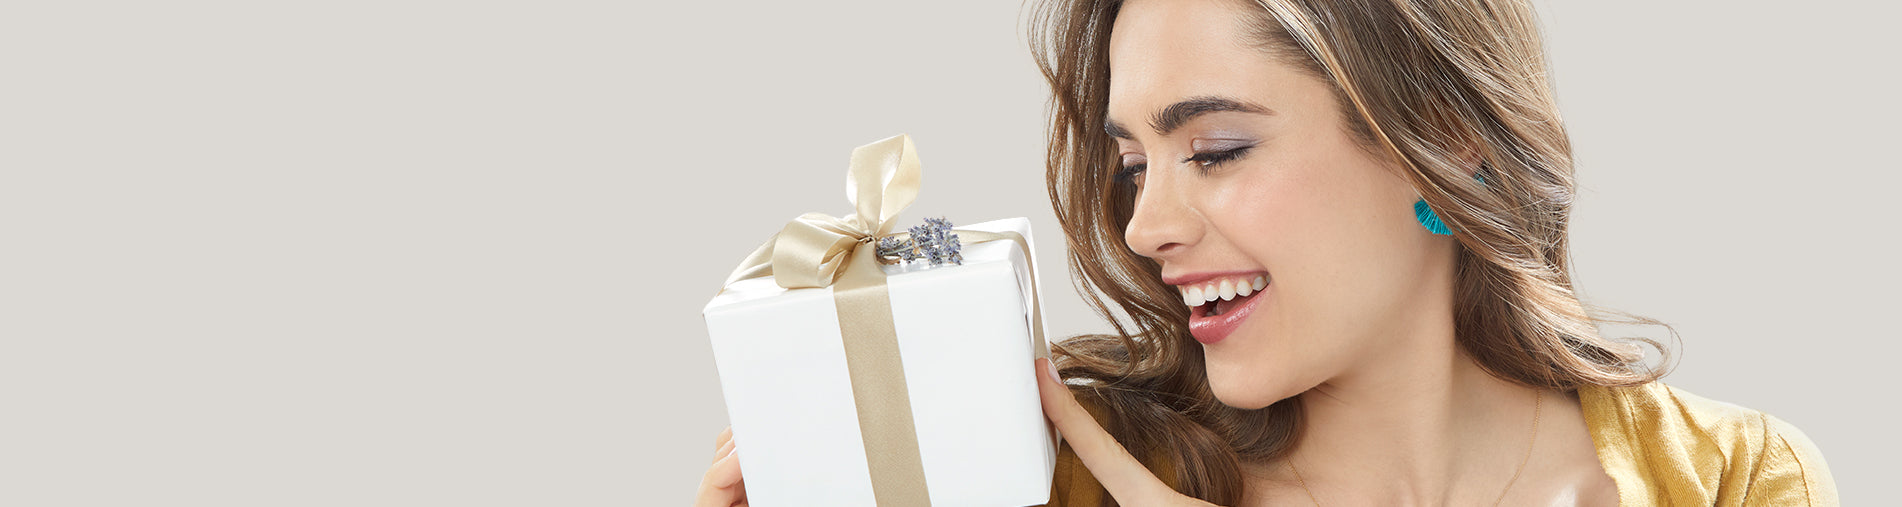 model holding a gift